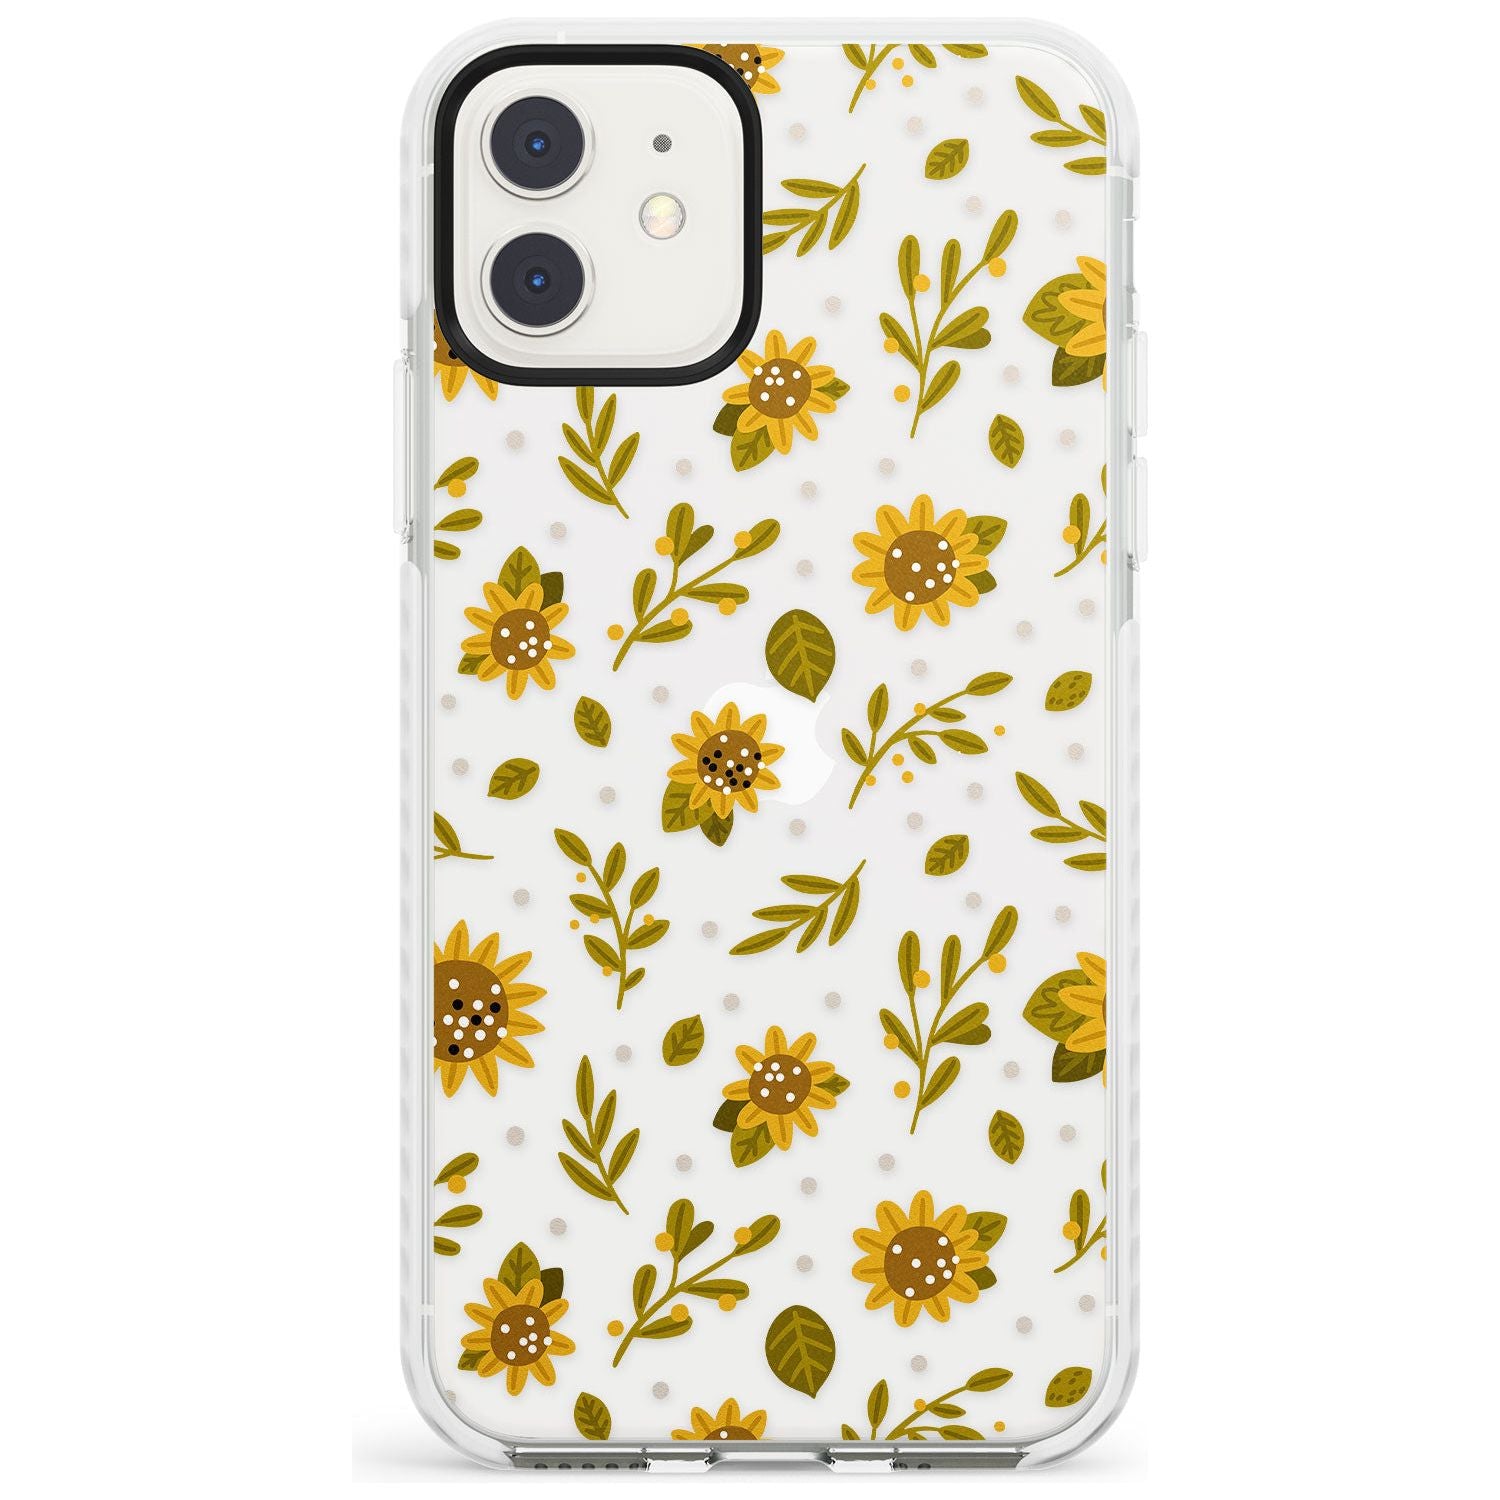 Sweet as Honey Patterns: Sunflowers (Clear) Impact Phone Case for iPhone 11